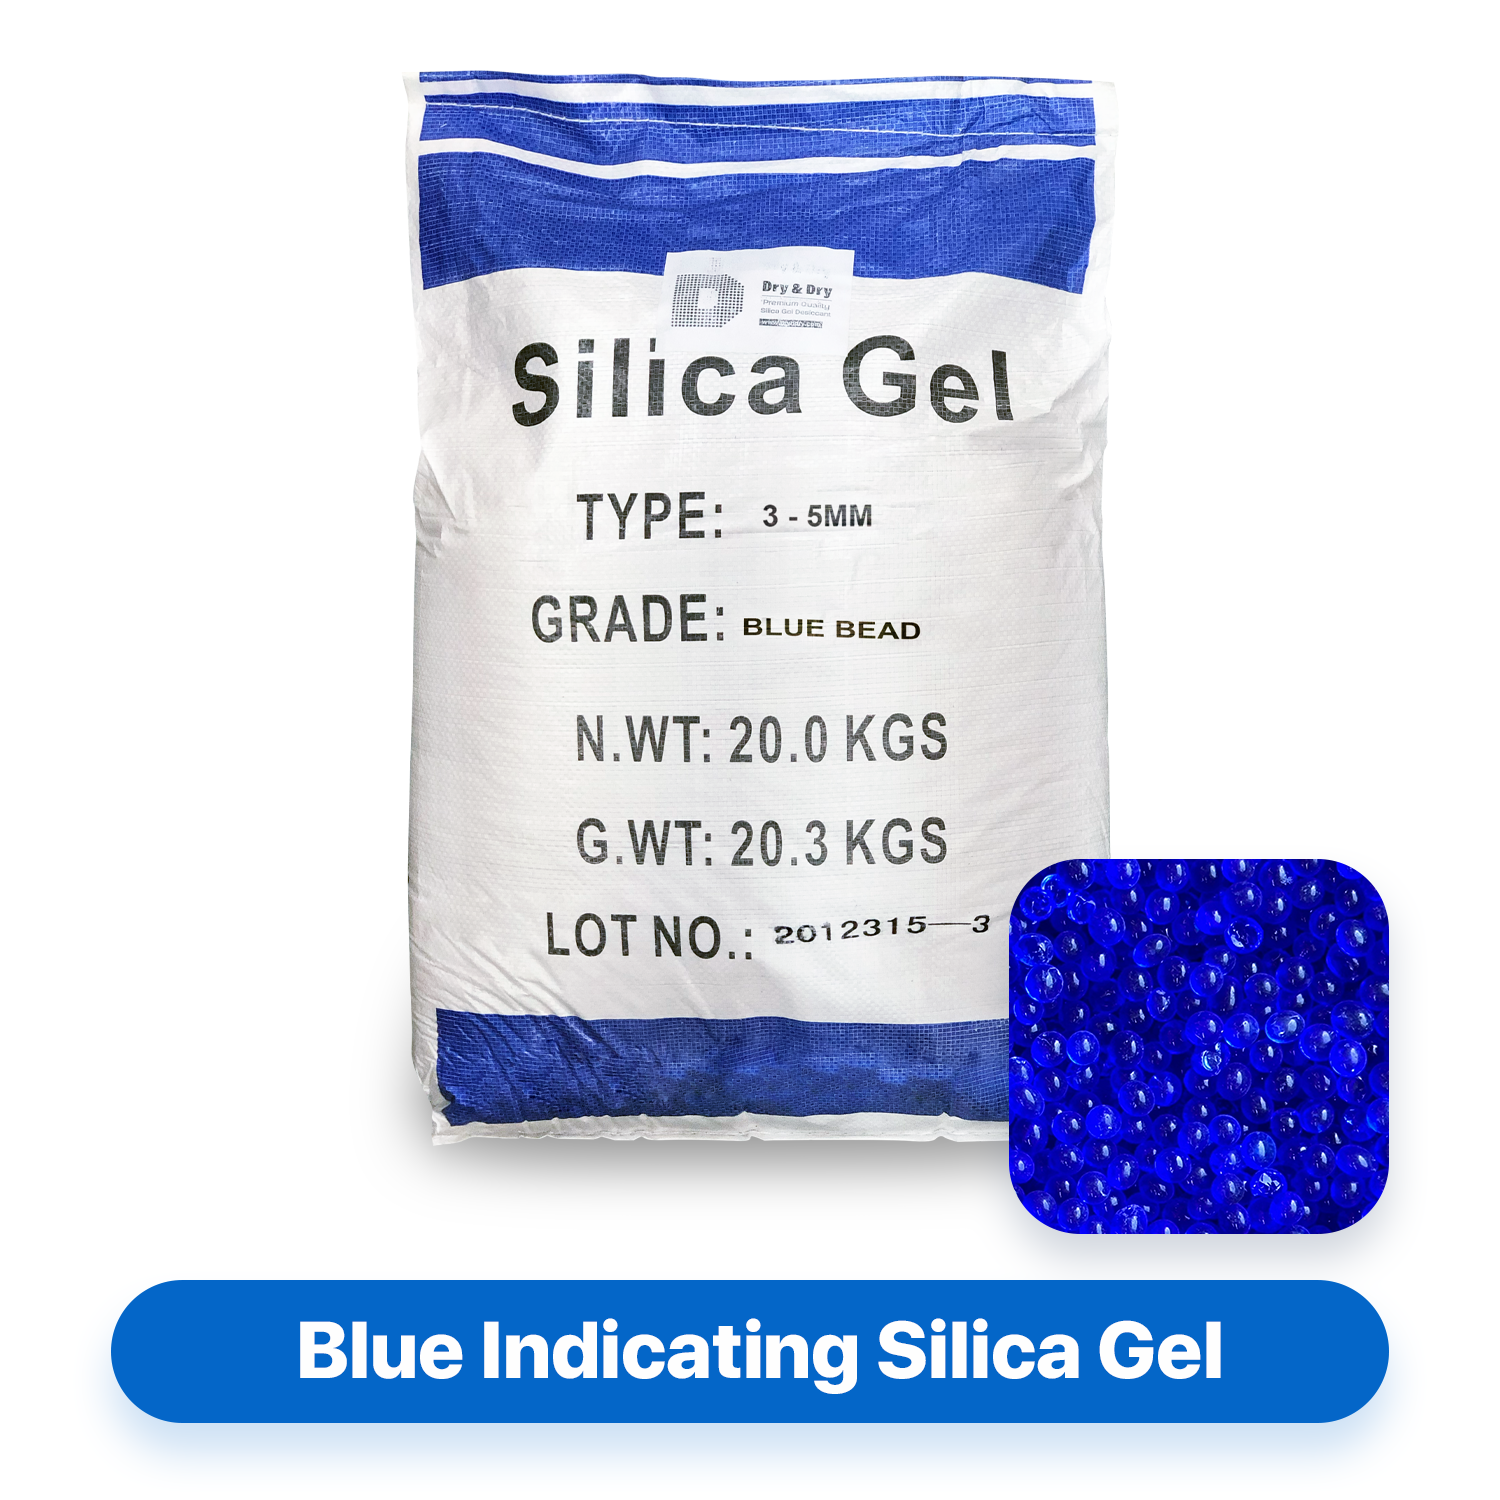 (44 LBS) "Dry & Dry" Premium Blue Indicating Silica Gel Desiccant Beads